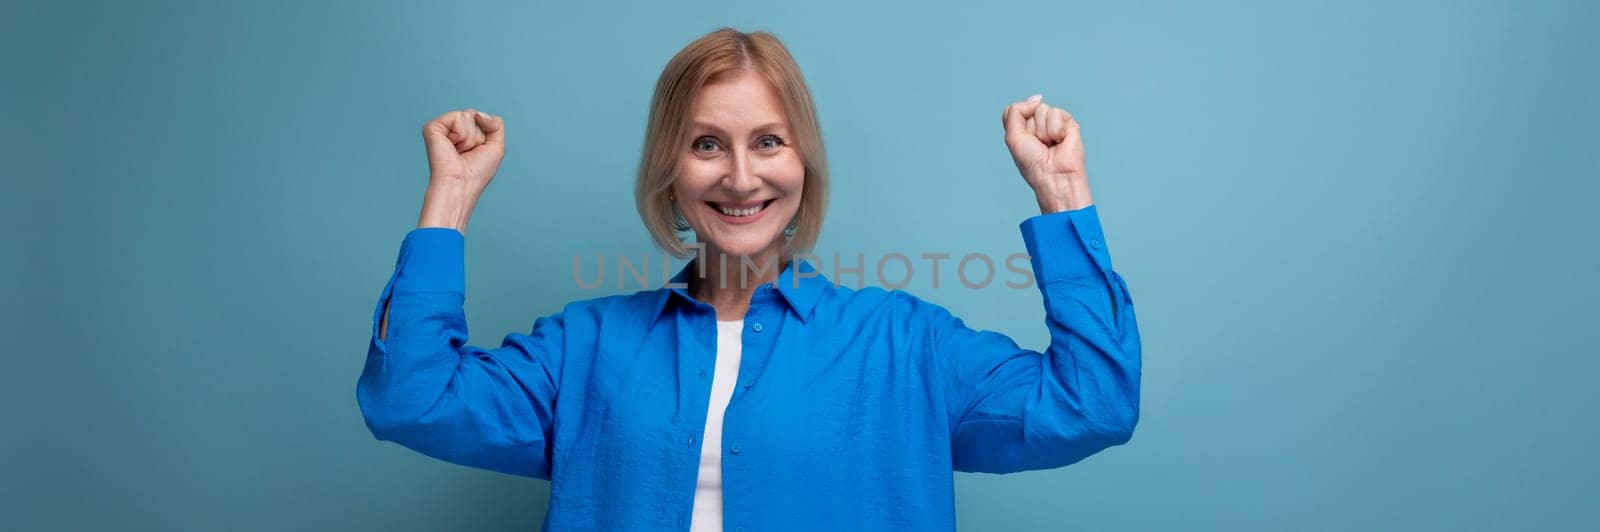 close-up of a joyful middle aged woman in a blue shirt on a blue background with copy space.